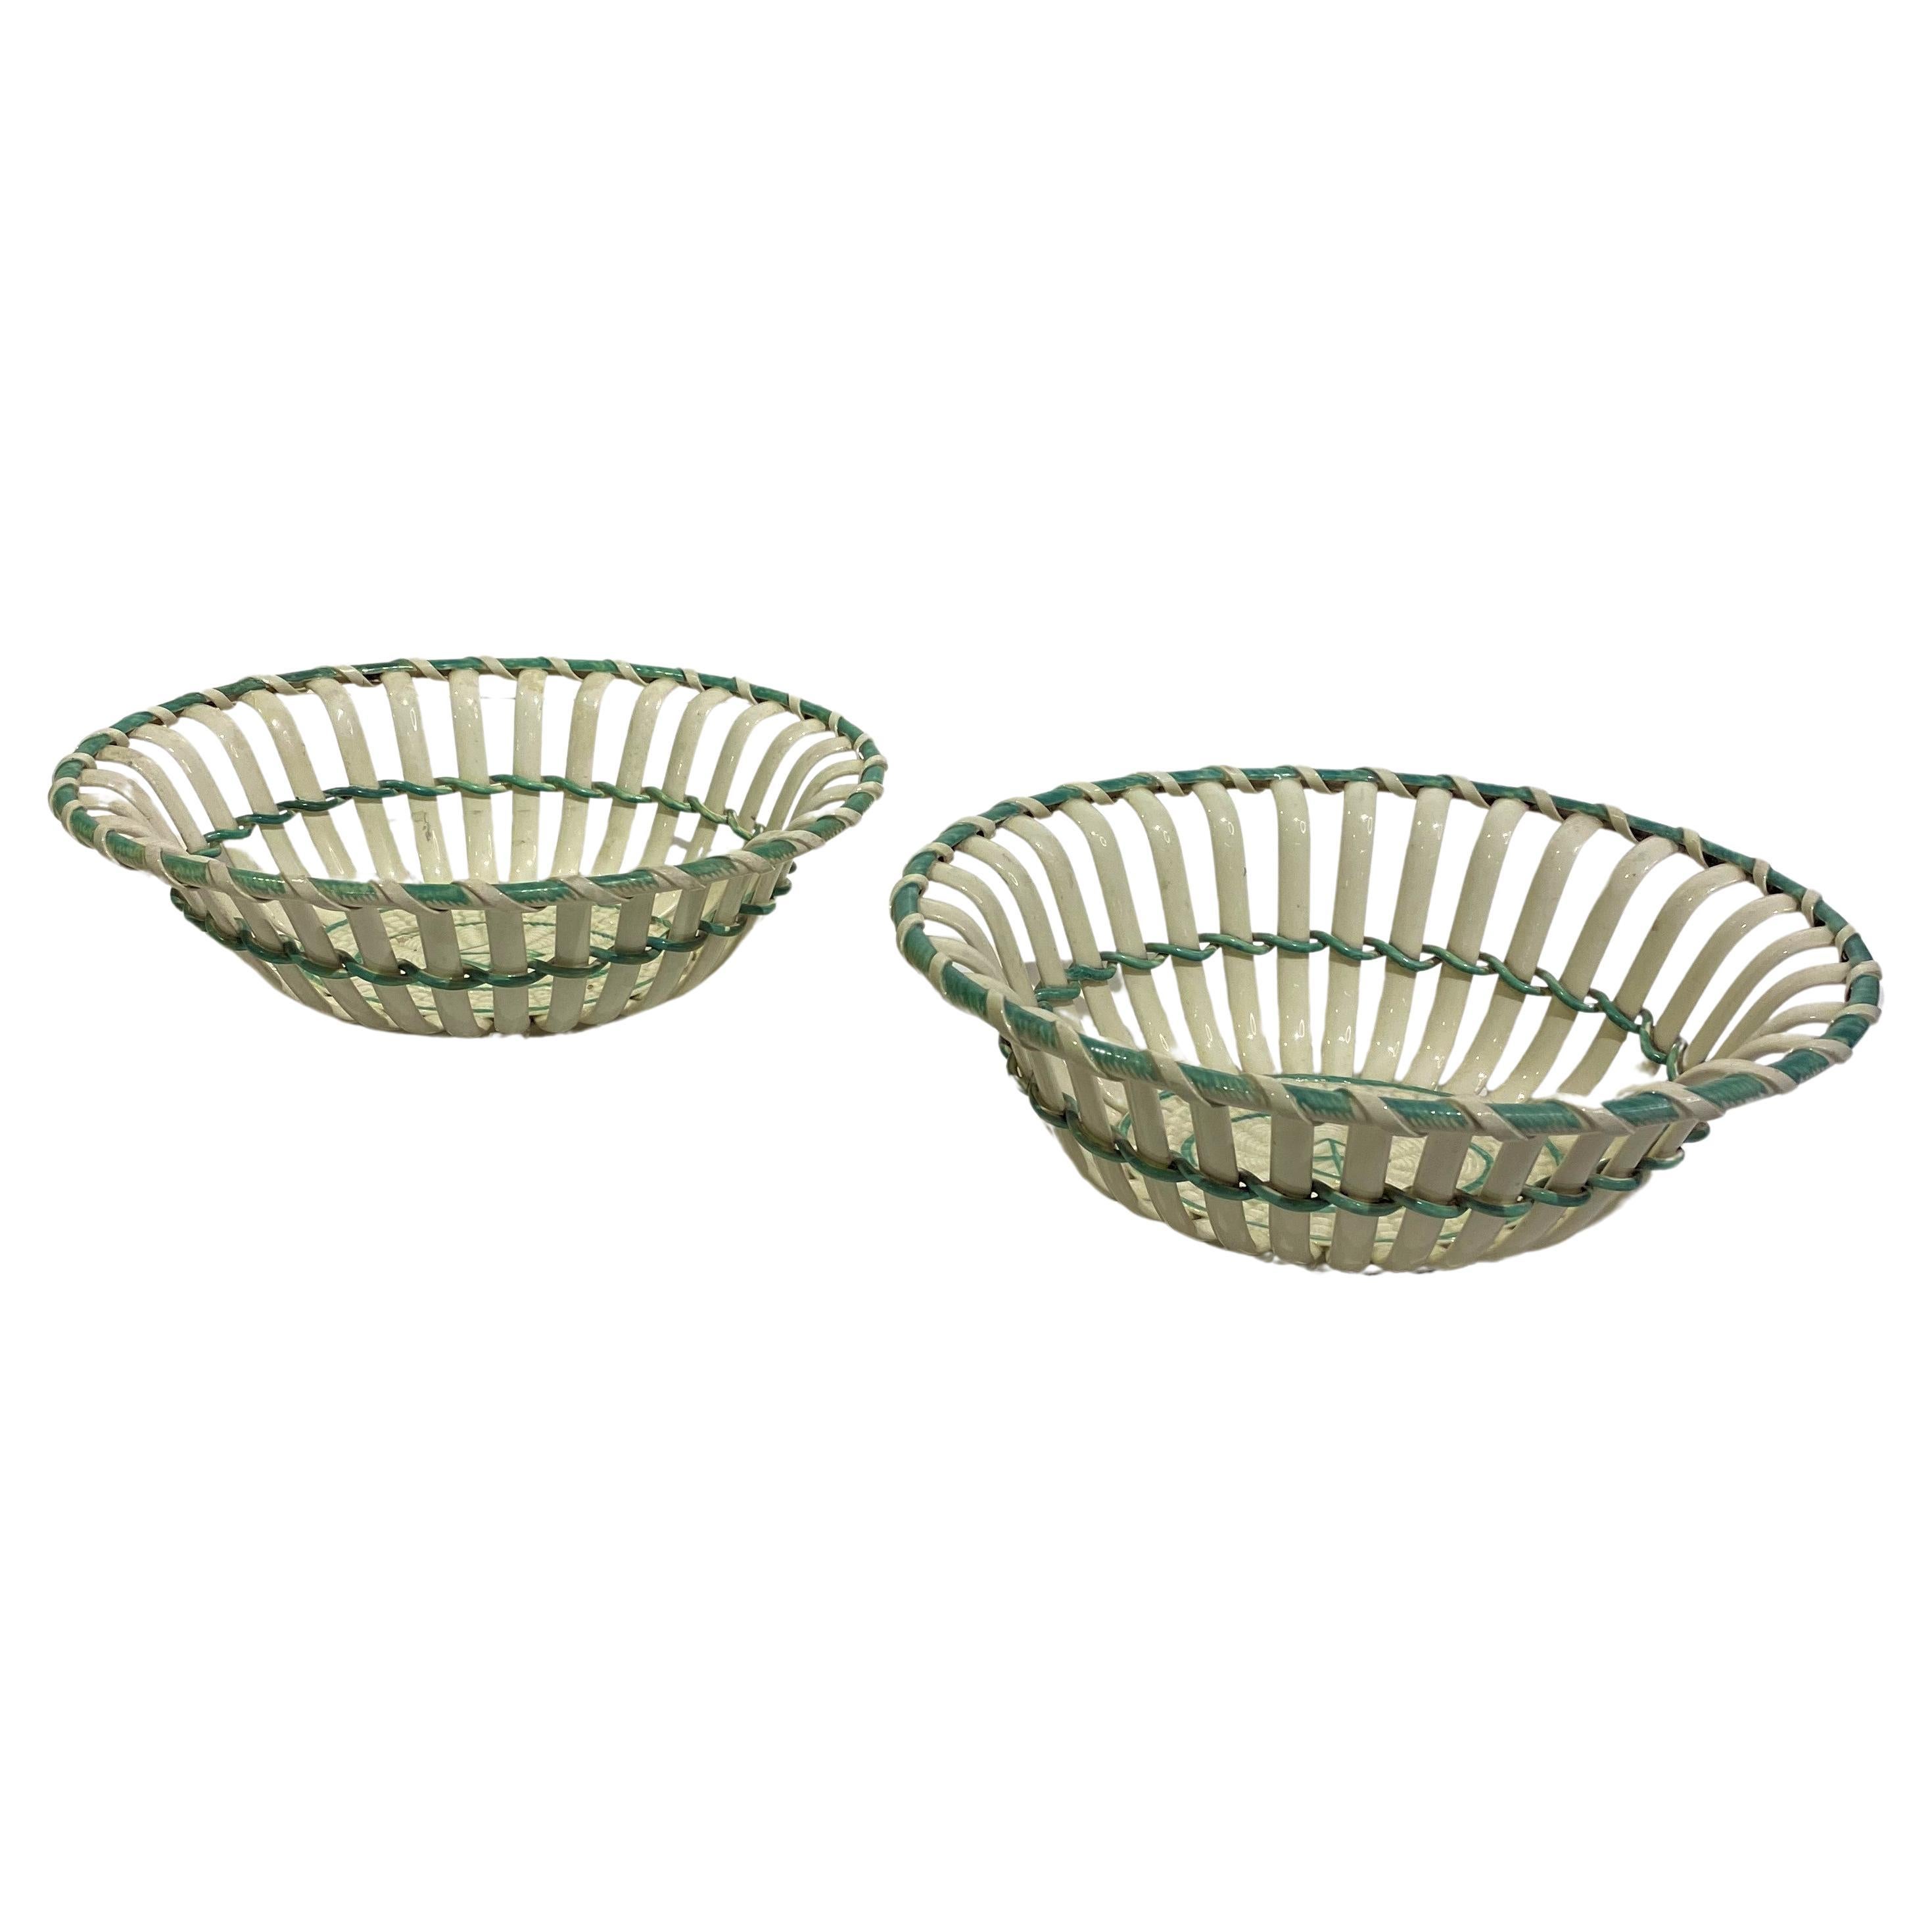 Pair of 19th Century Bi-Color Pierced Baskets from England